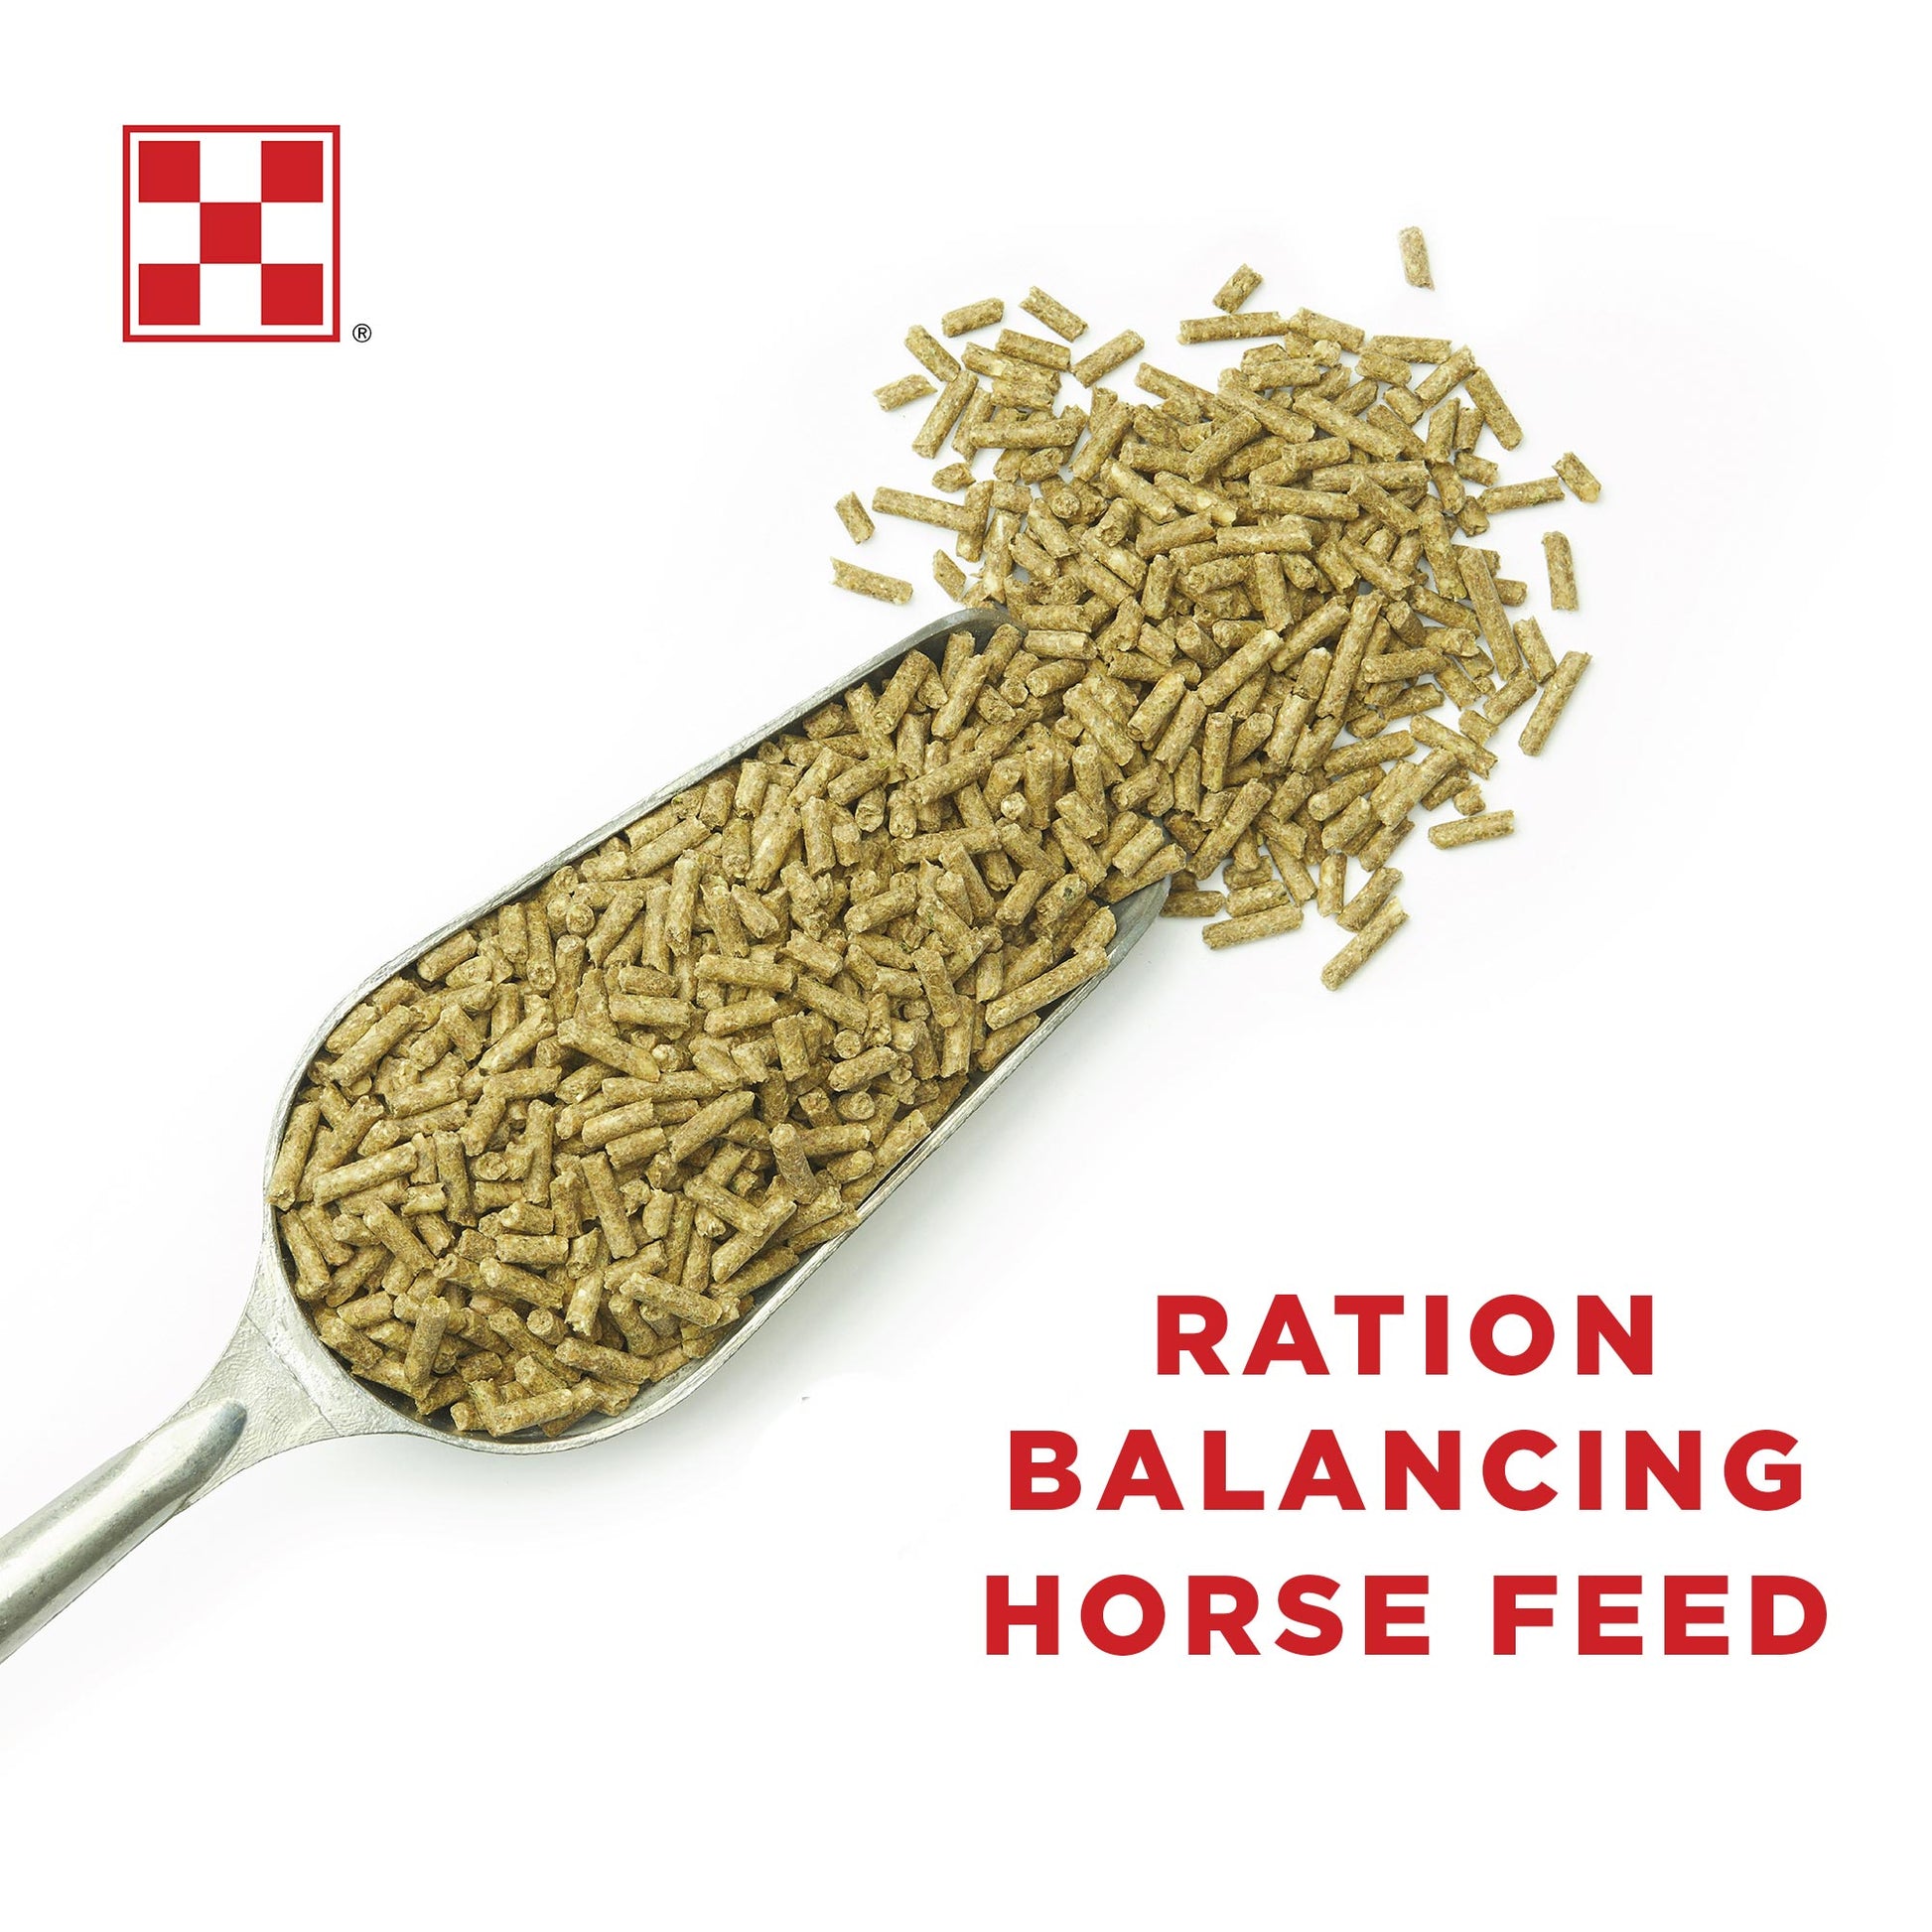 Feed Balancers: Much More Than Simple Nutrition